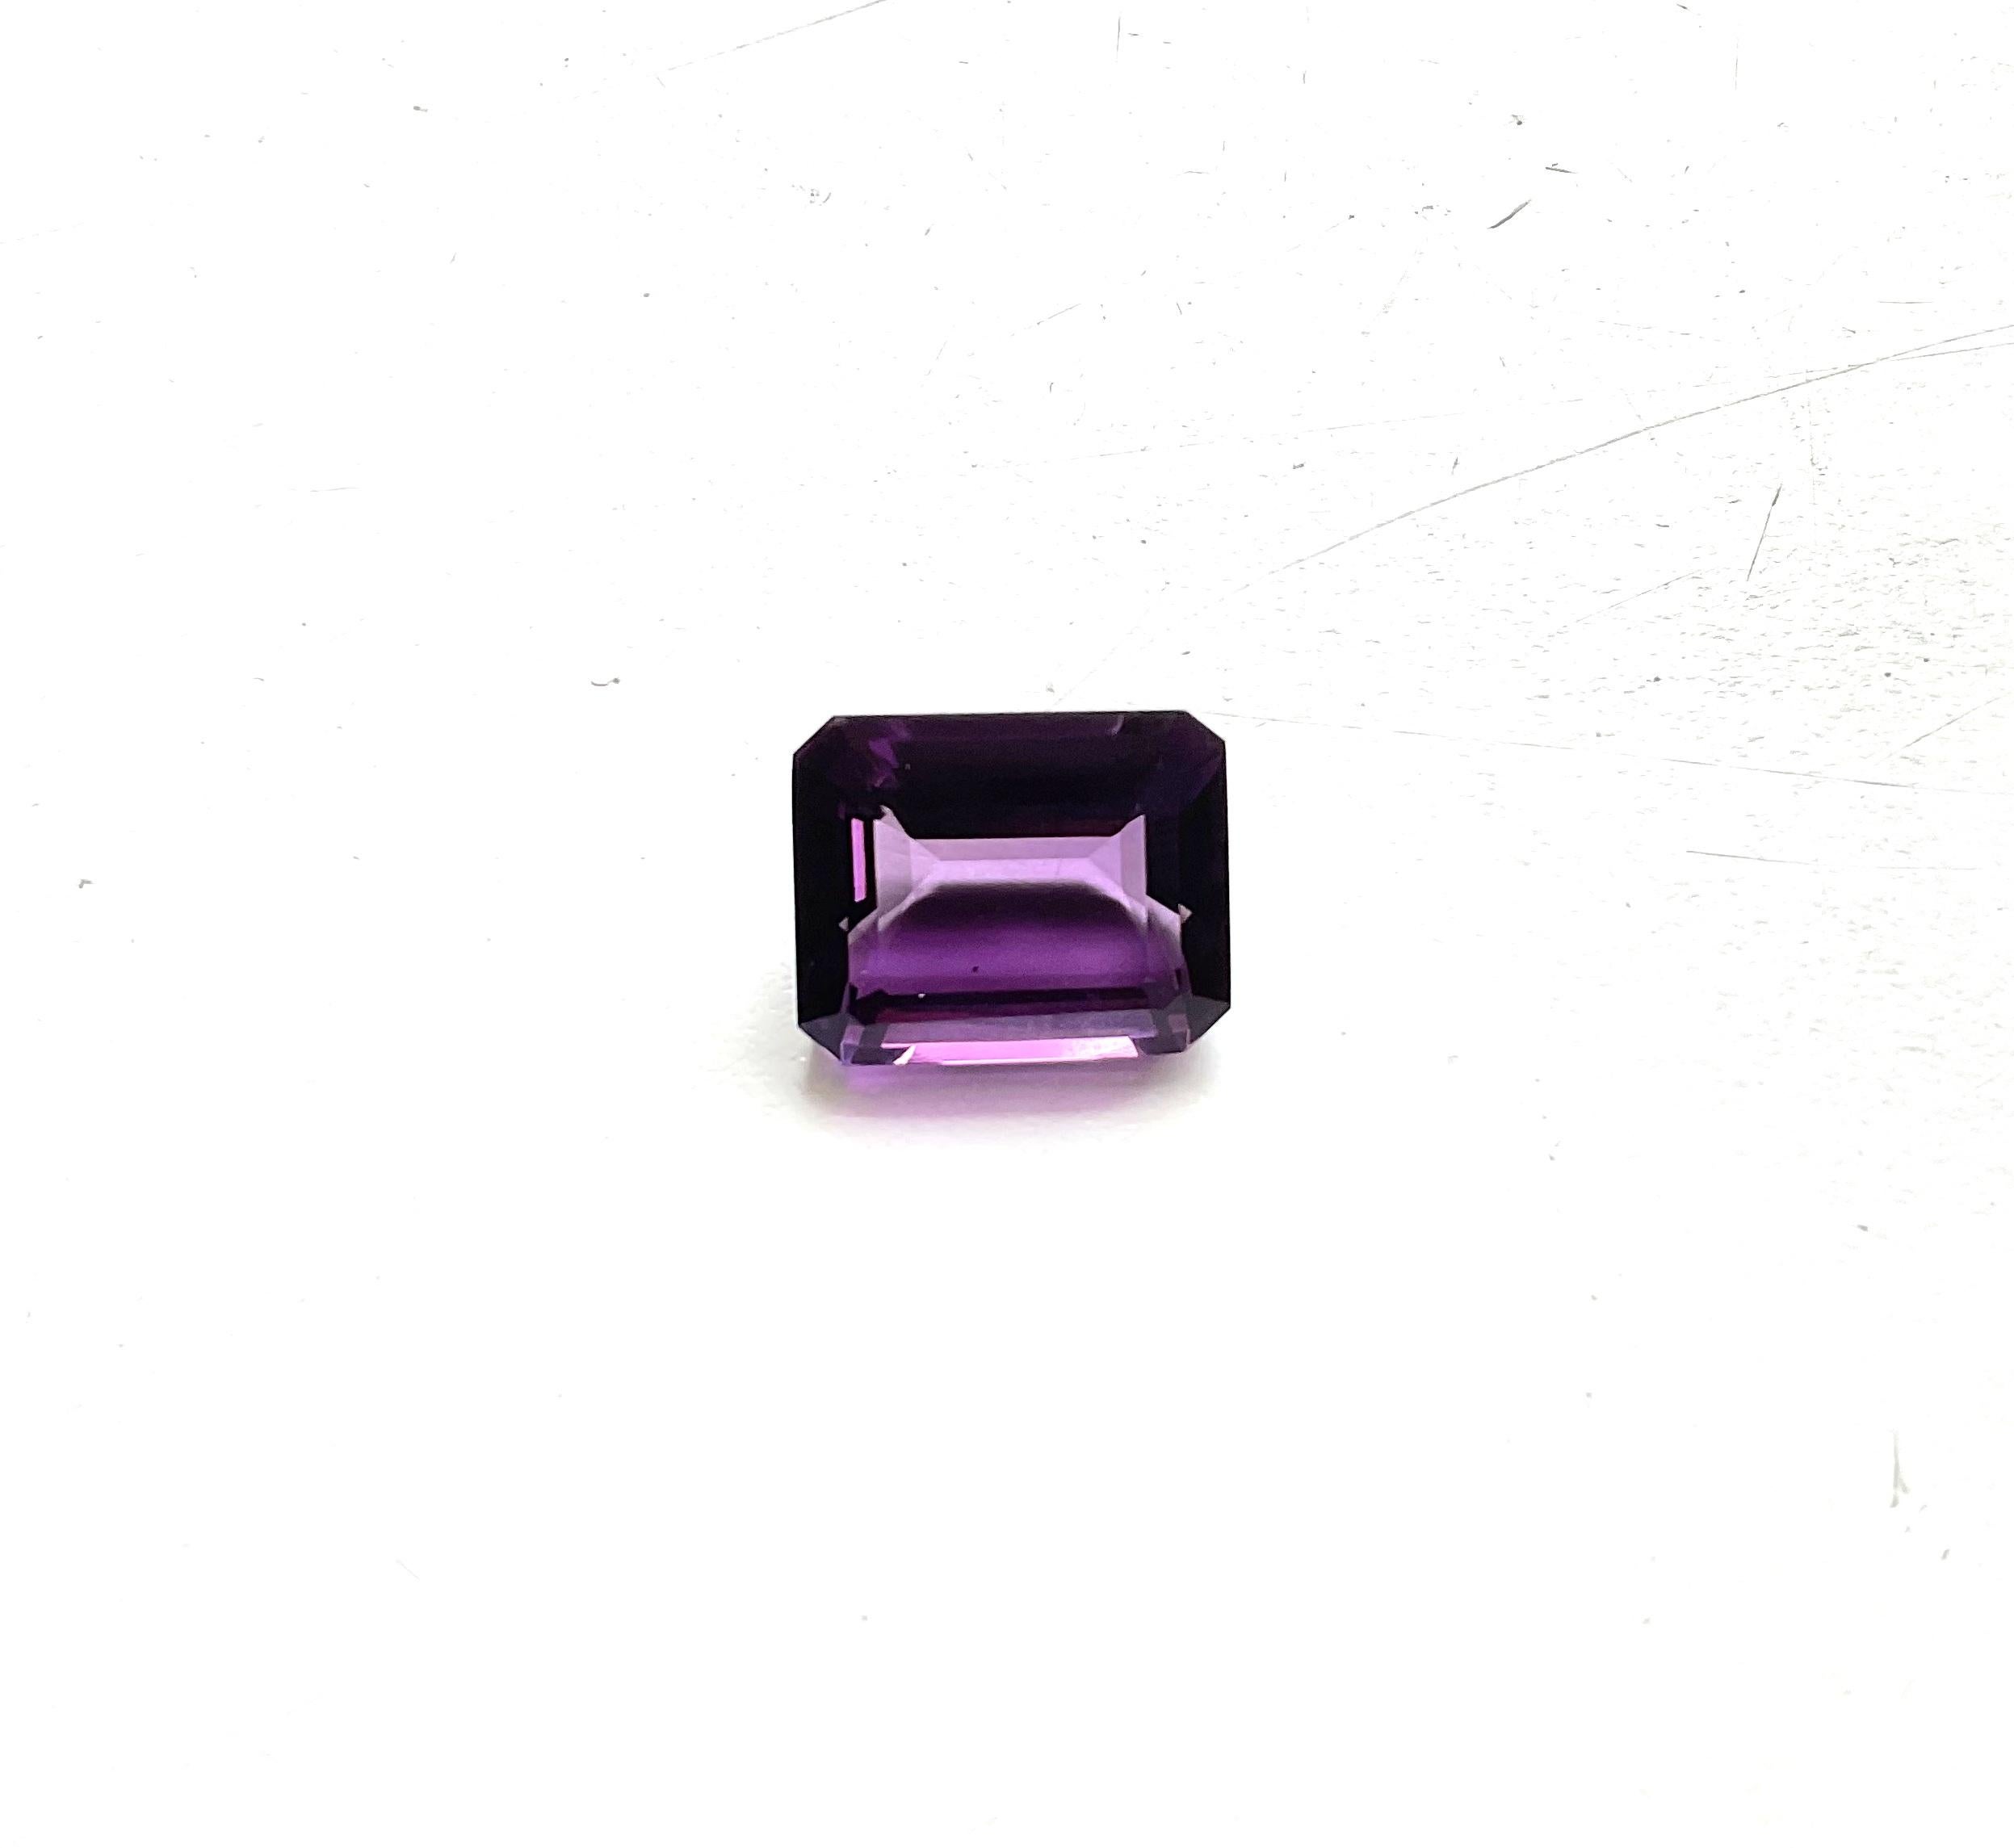 18.67 Carat Amethyst Top Quality Faceted Octagon Cut stone Gemstone For Jewelry  For Sale 1